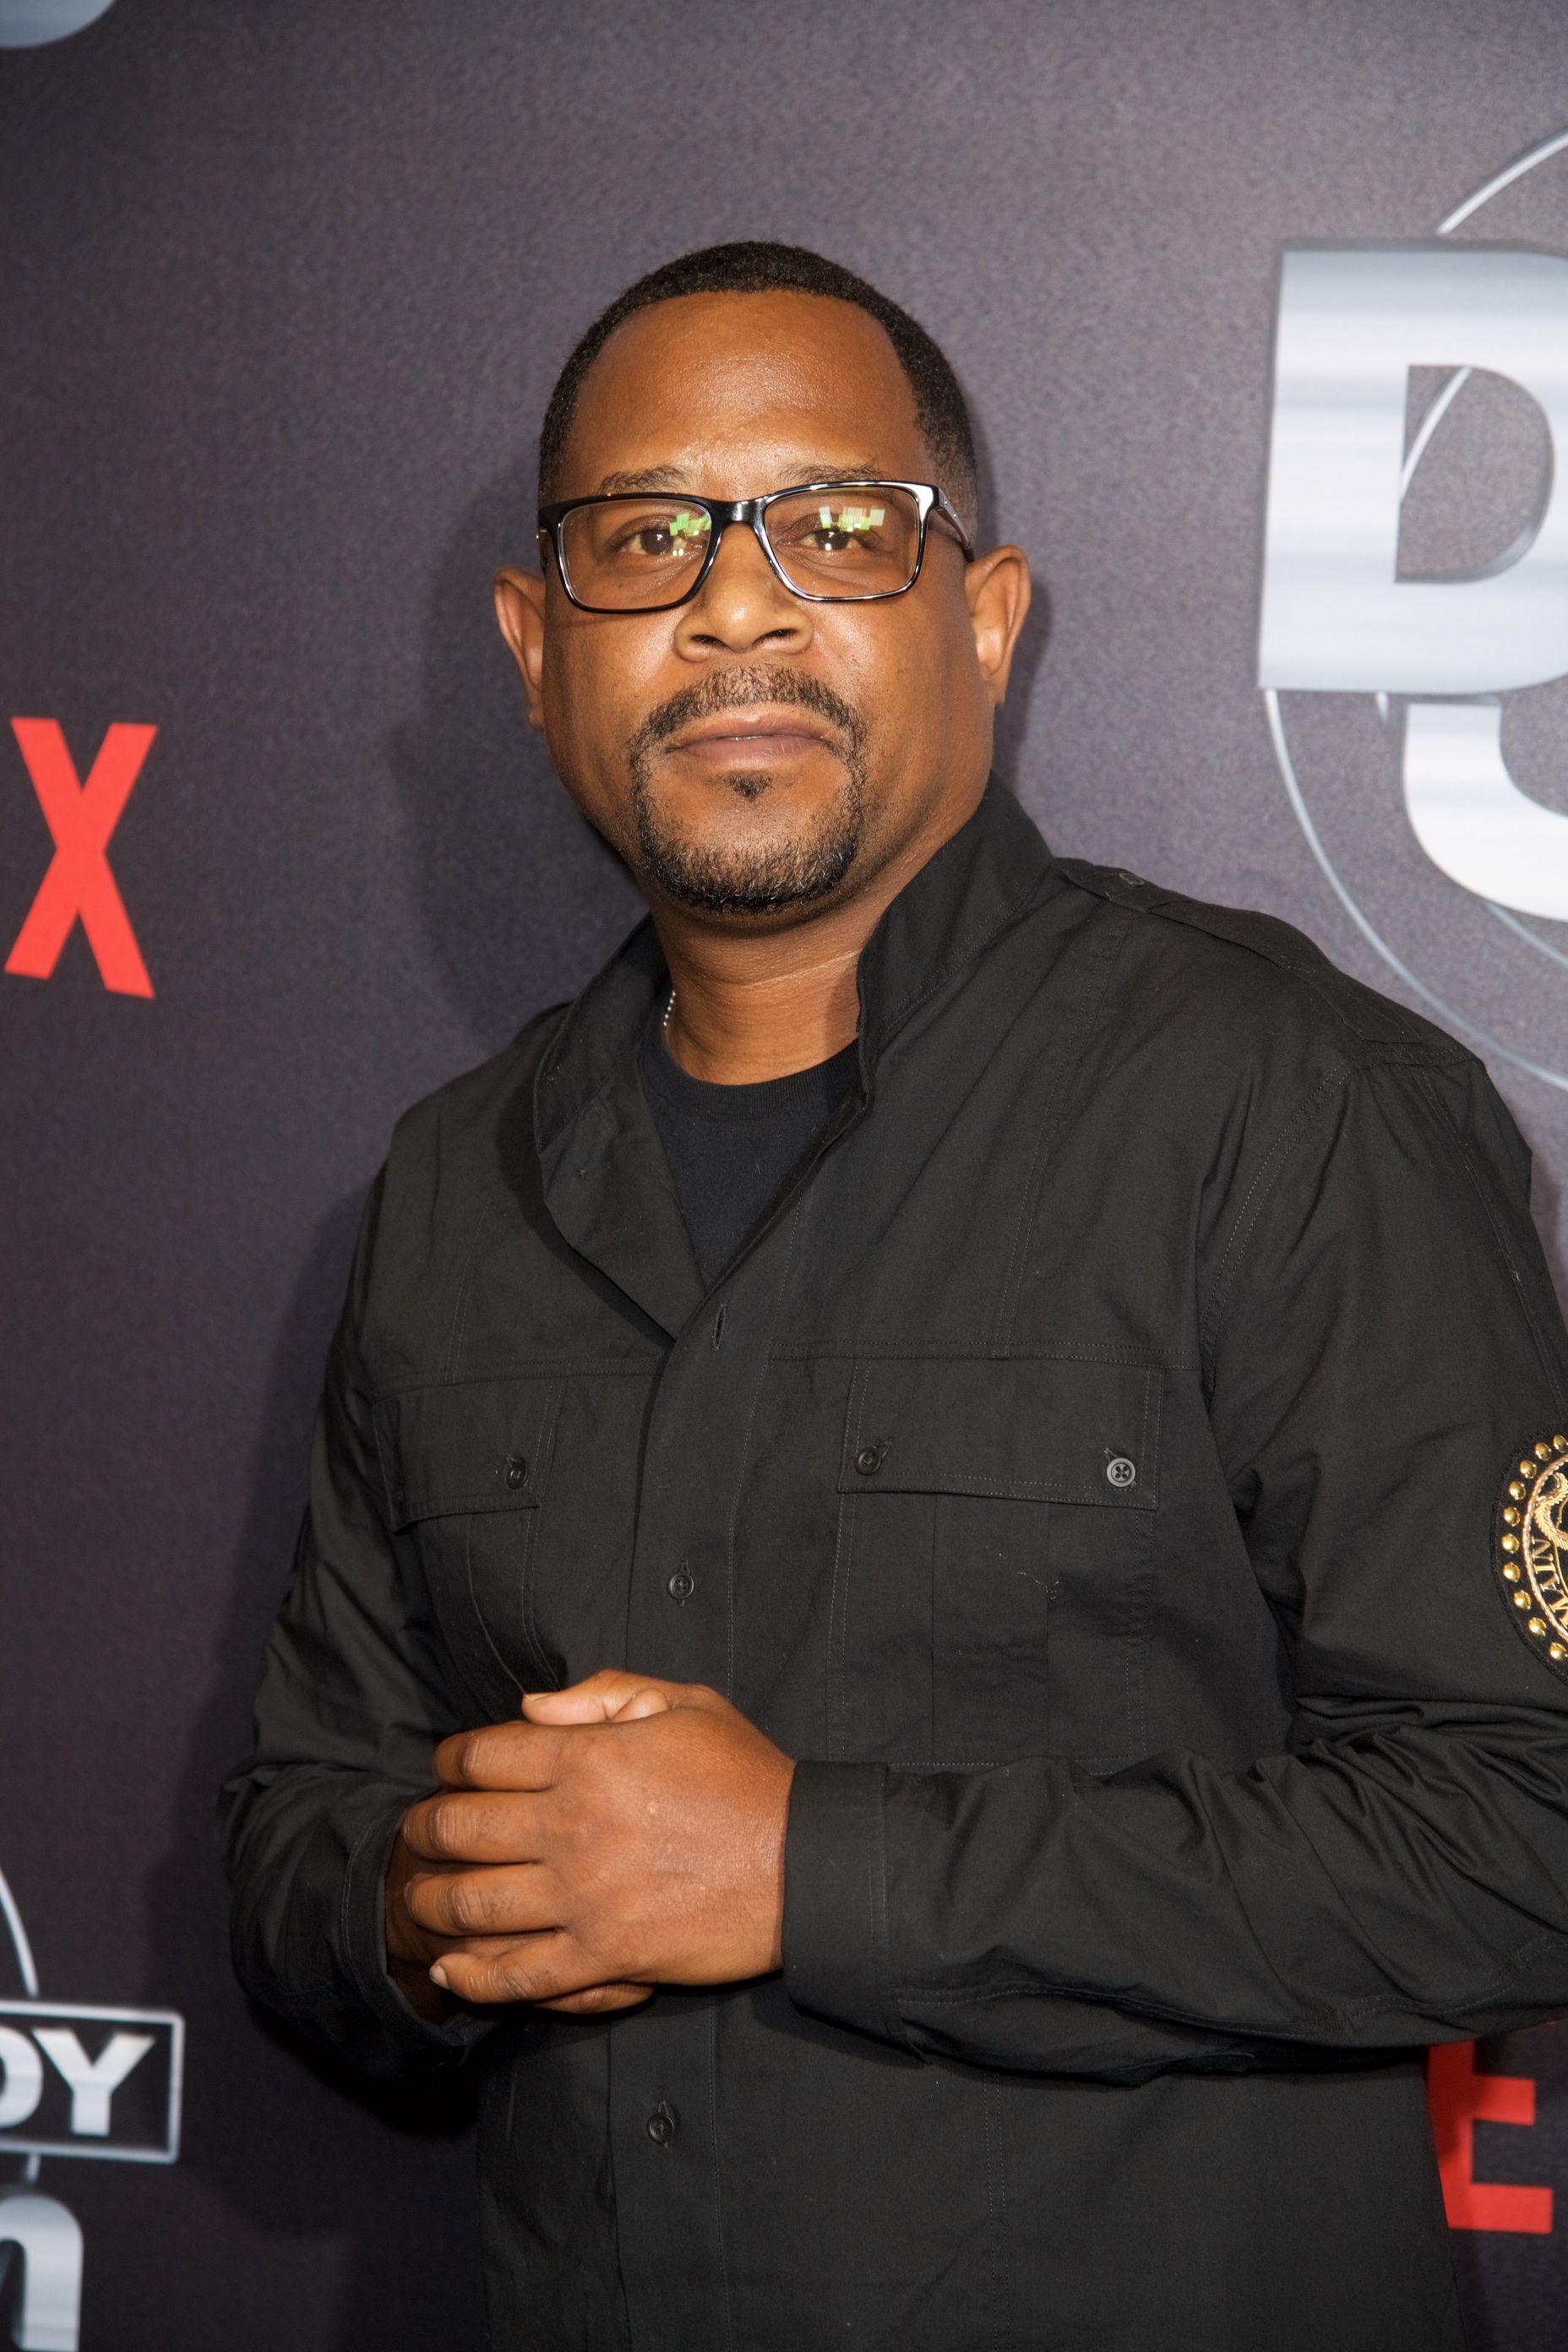 Martin Lawrence at Netflix Presents Russell Simmons "Def Comedy Jam 25" Special Event at The Beverly Hilton Hotel on September 10, 2017 | Photo: Getty Images